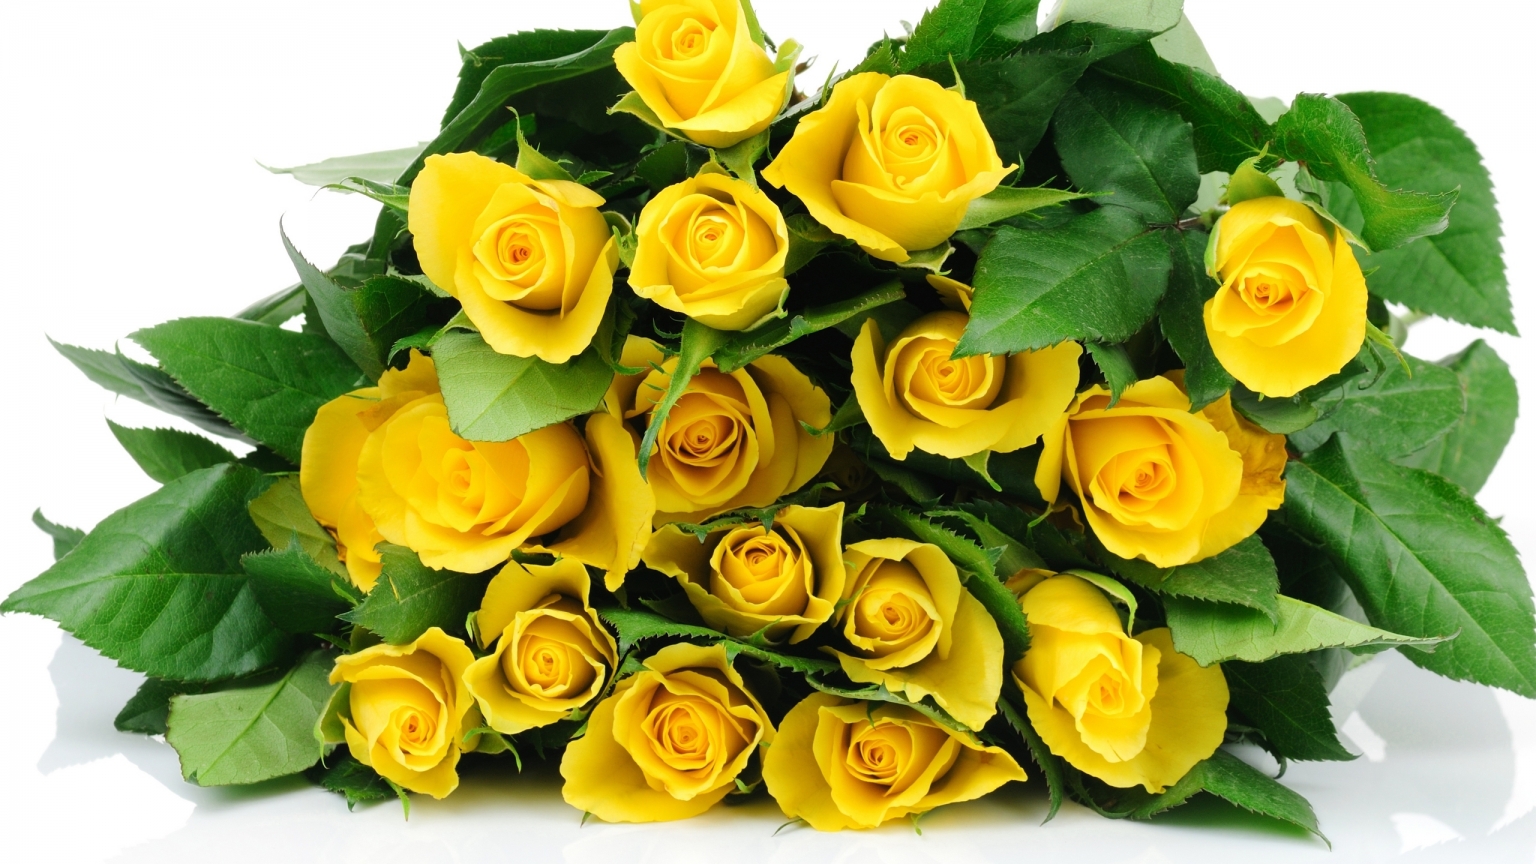 Yellow Roses Bucket for 1536 x 864 HDTV resolution